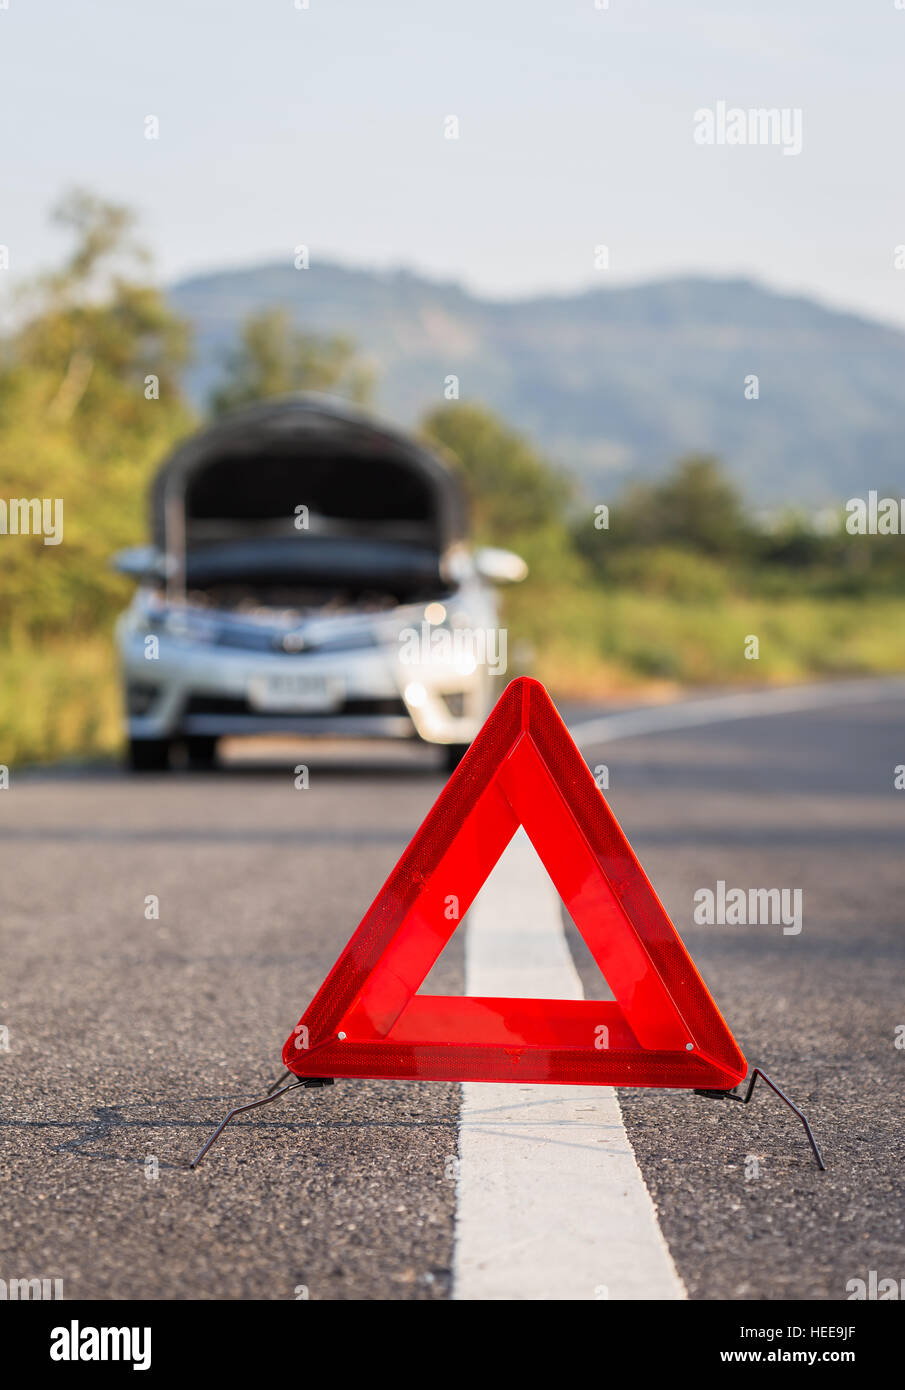 Red emergency stop sign and broken silver car on the road Stock Photo